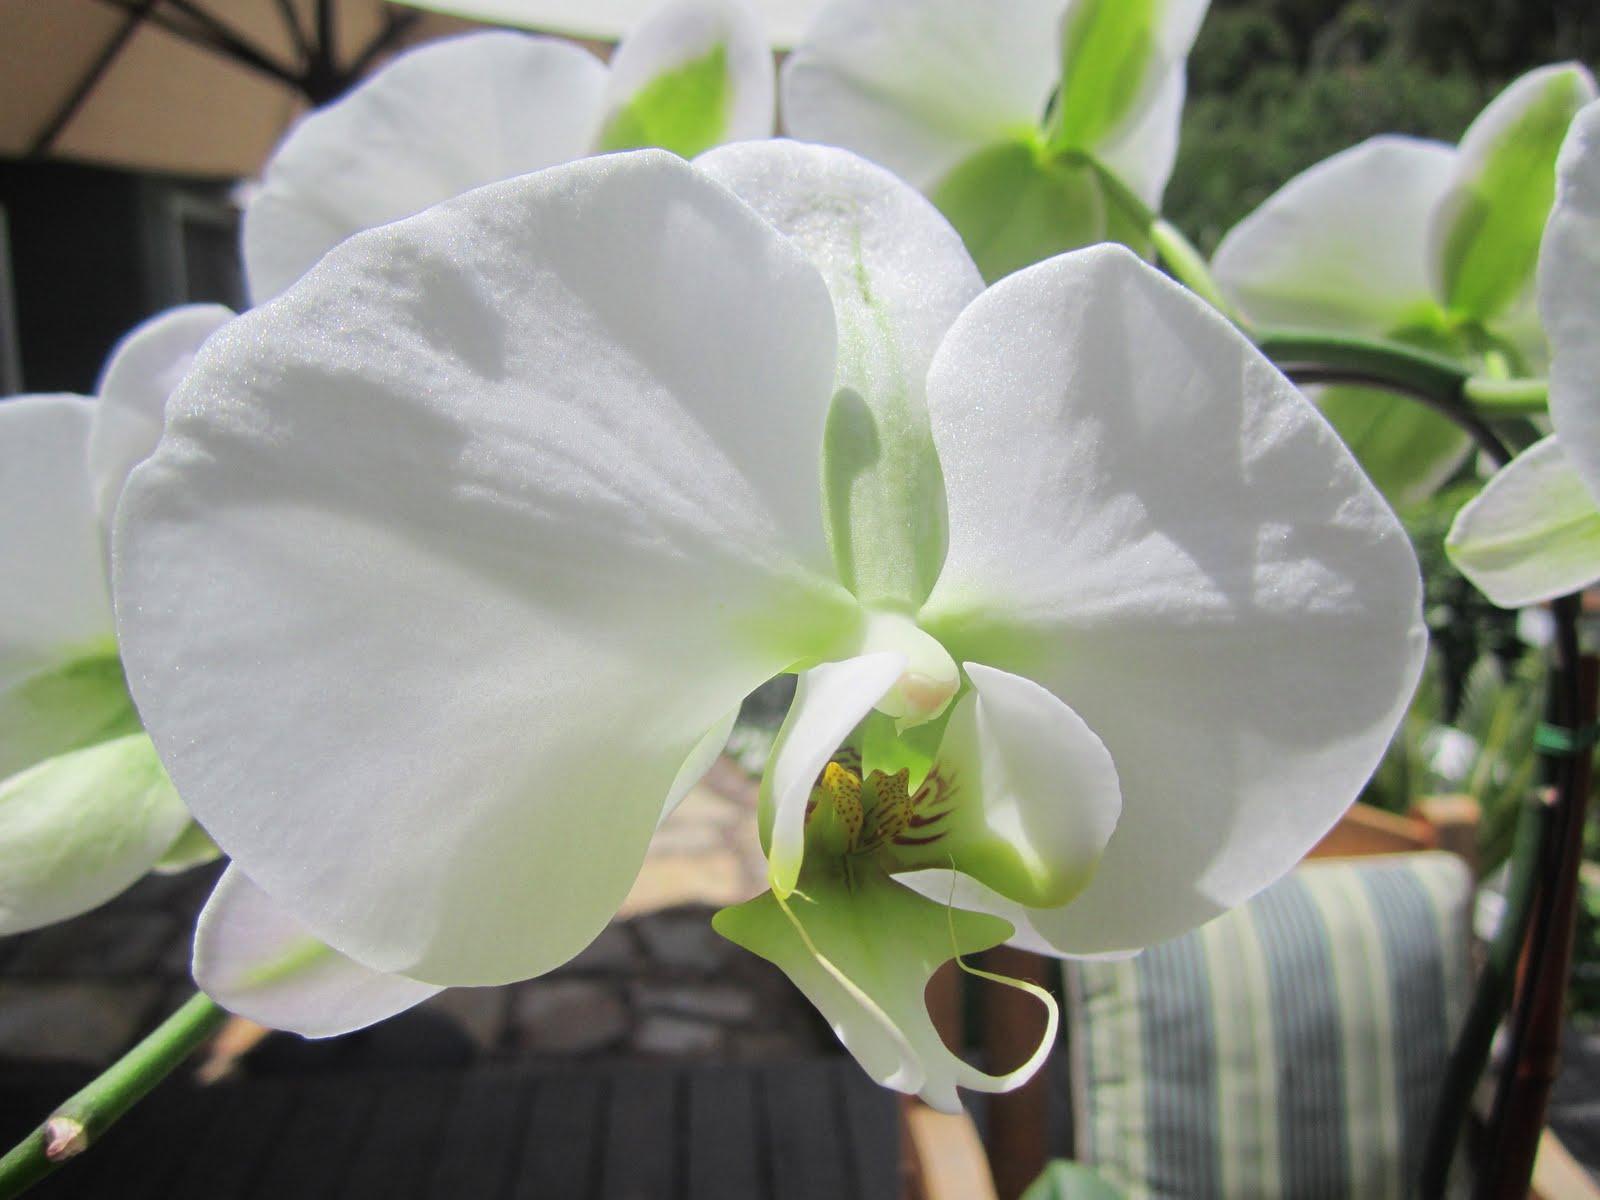 A phalaenopsis orchid for you